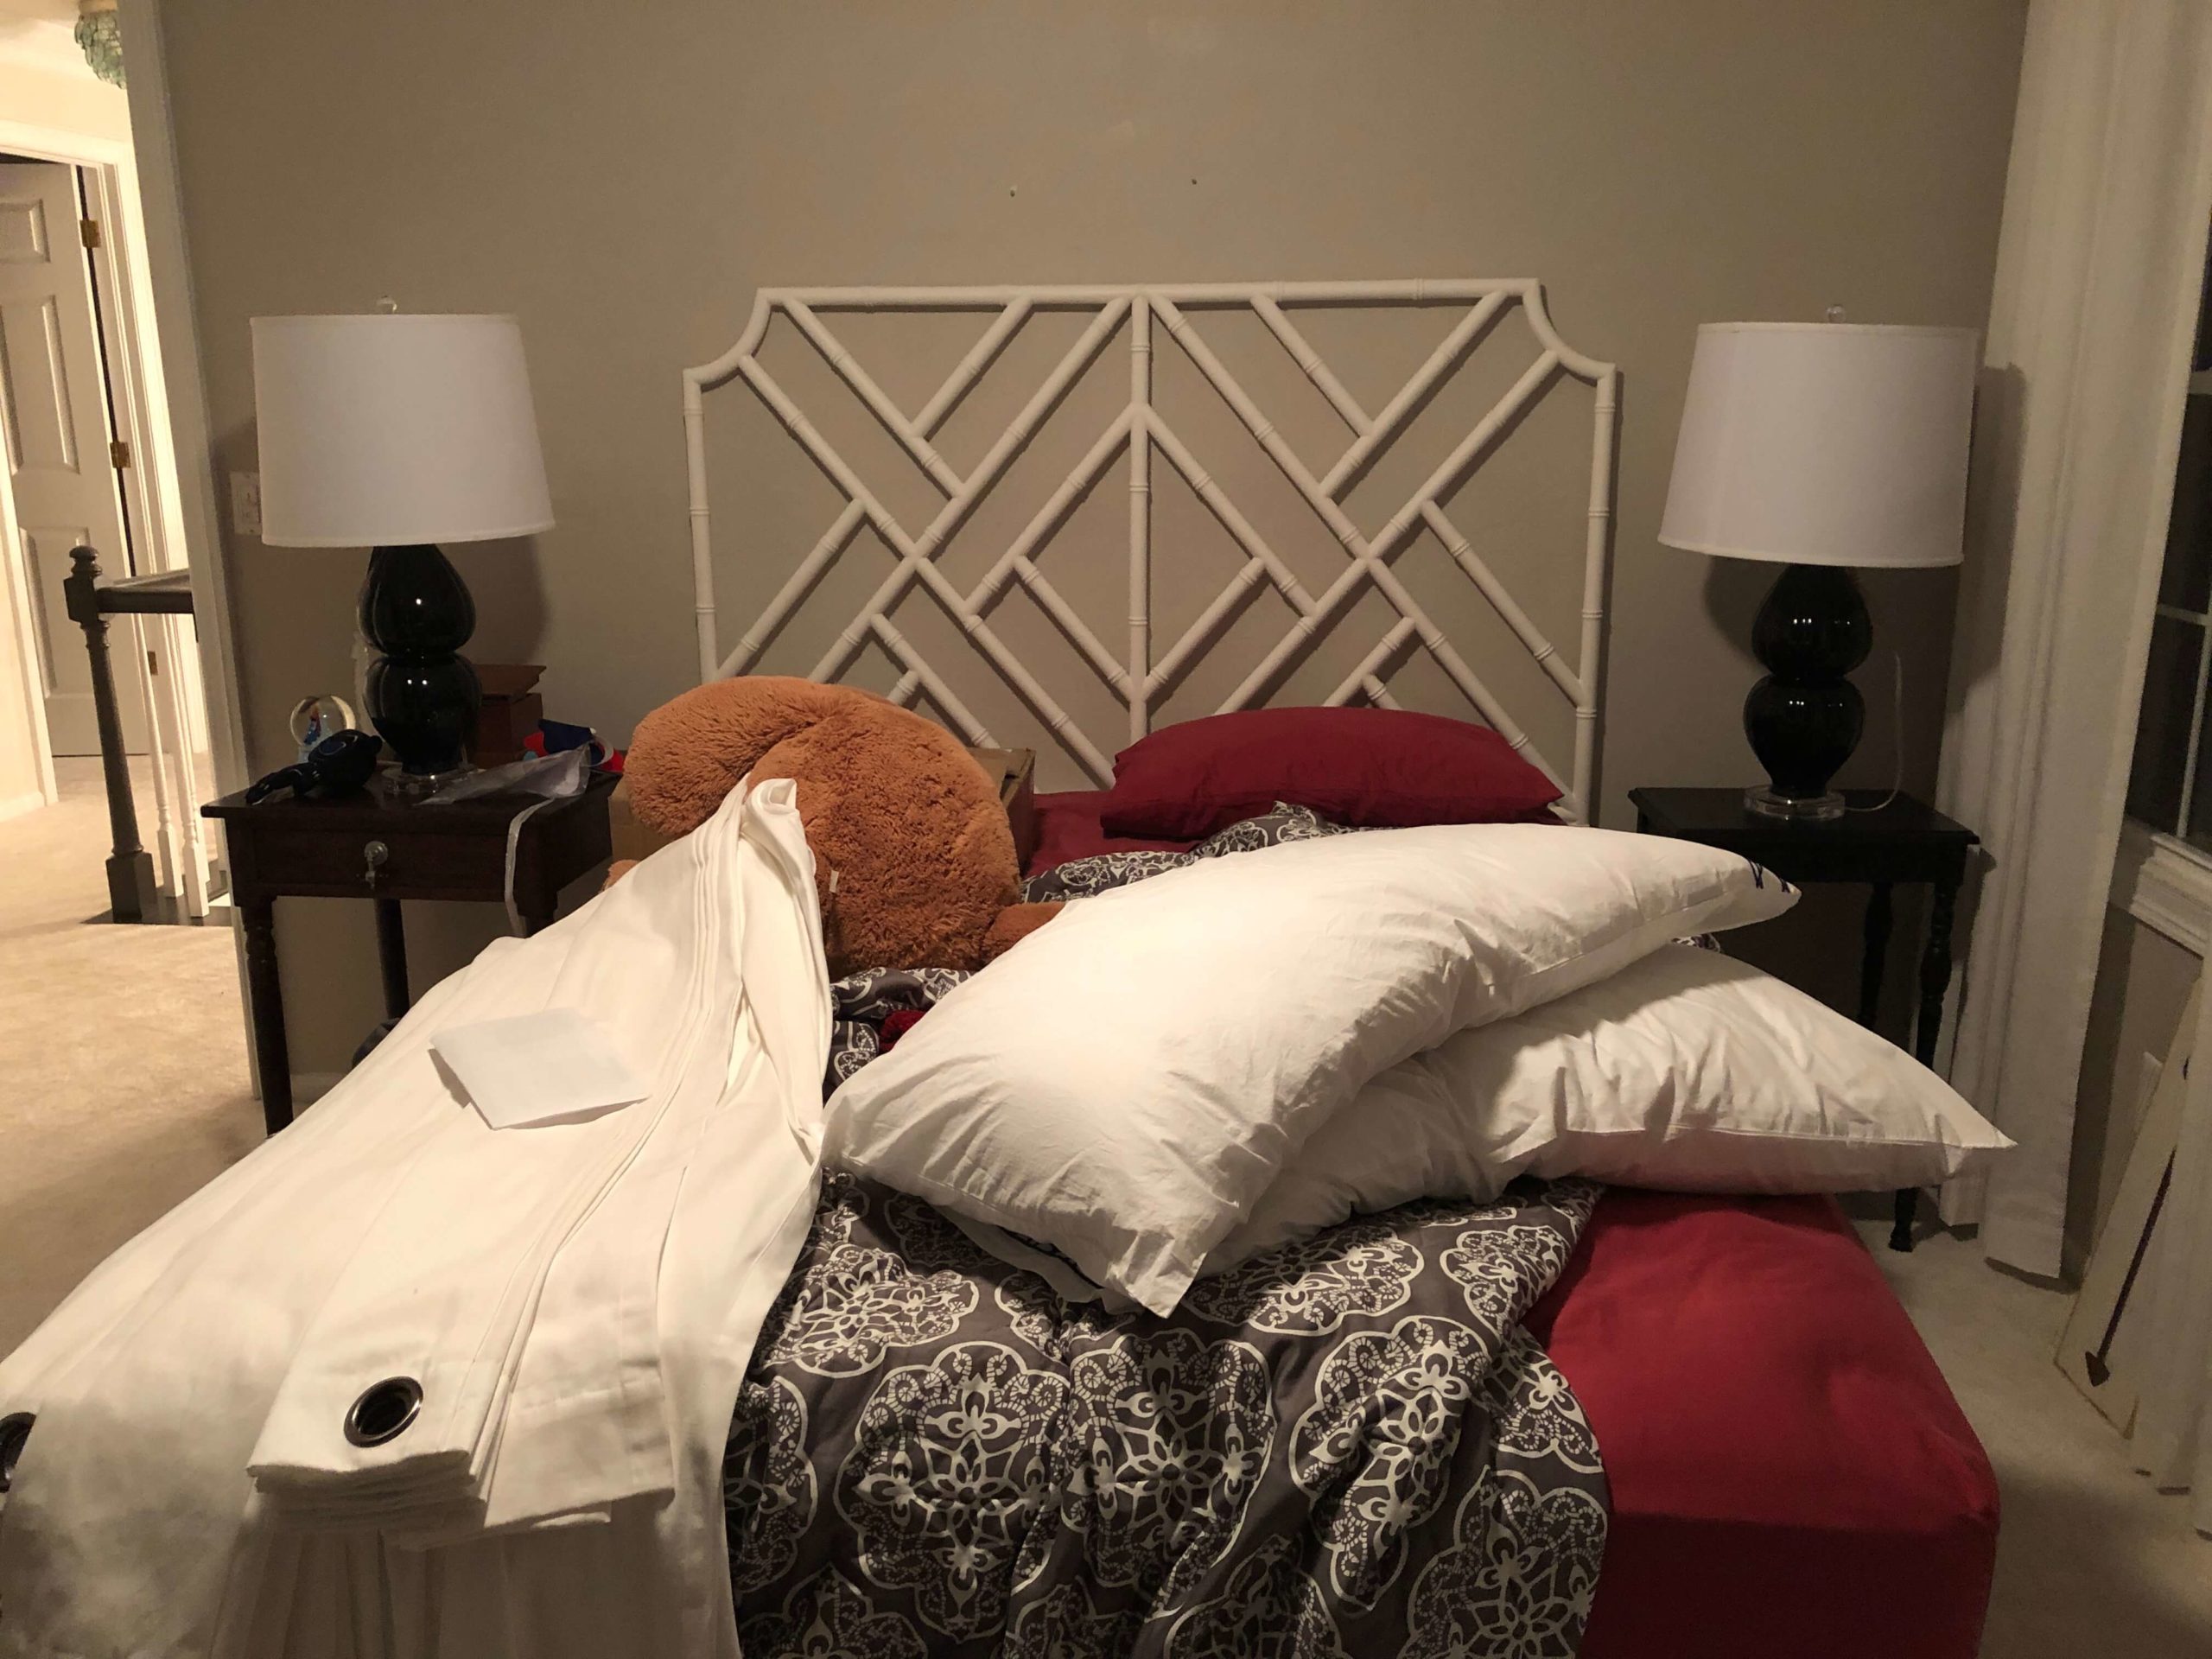 Lamps and Headboard for Guest Bedroom Lindsey Putzier Eclectic Interiors